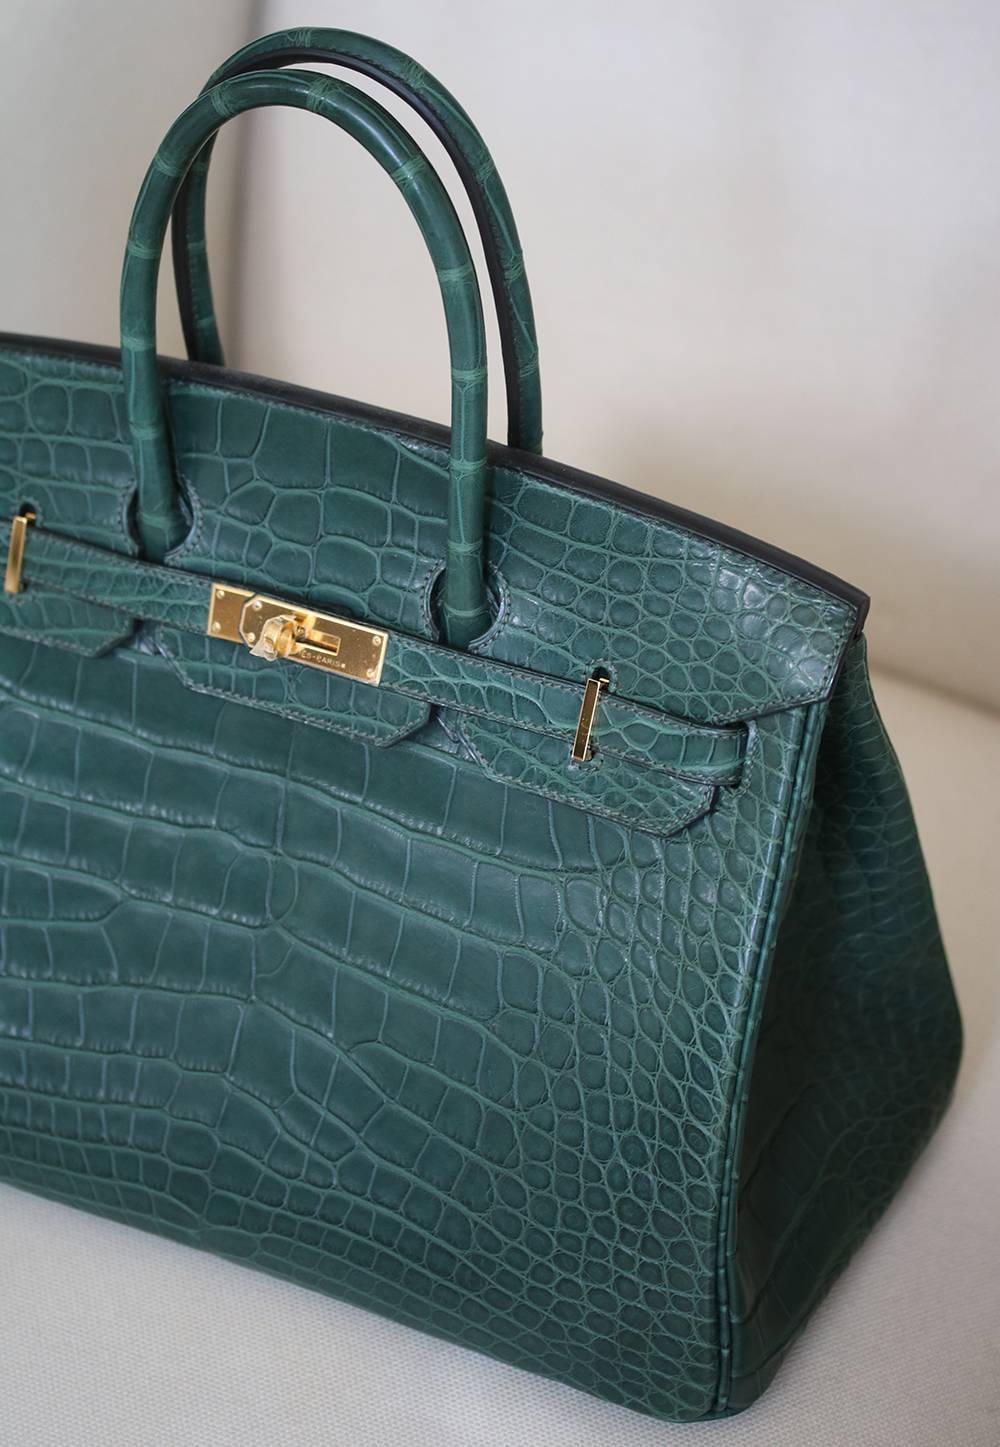 The most fabulous of all bags can be yours today!

Luxuriously rich coloured with tonal top stitching.

This Birkin is in new, unworn - it hasn't been used, and its protective stickers are still attached - and has been carefully kept by collector